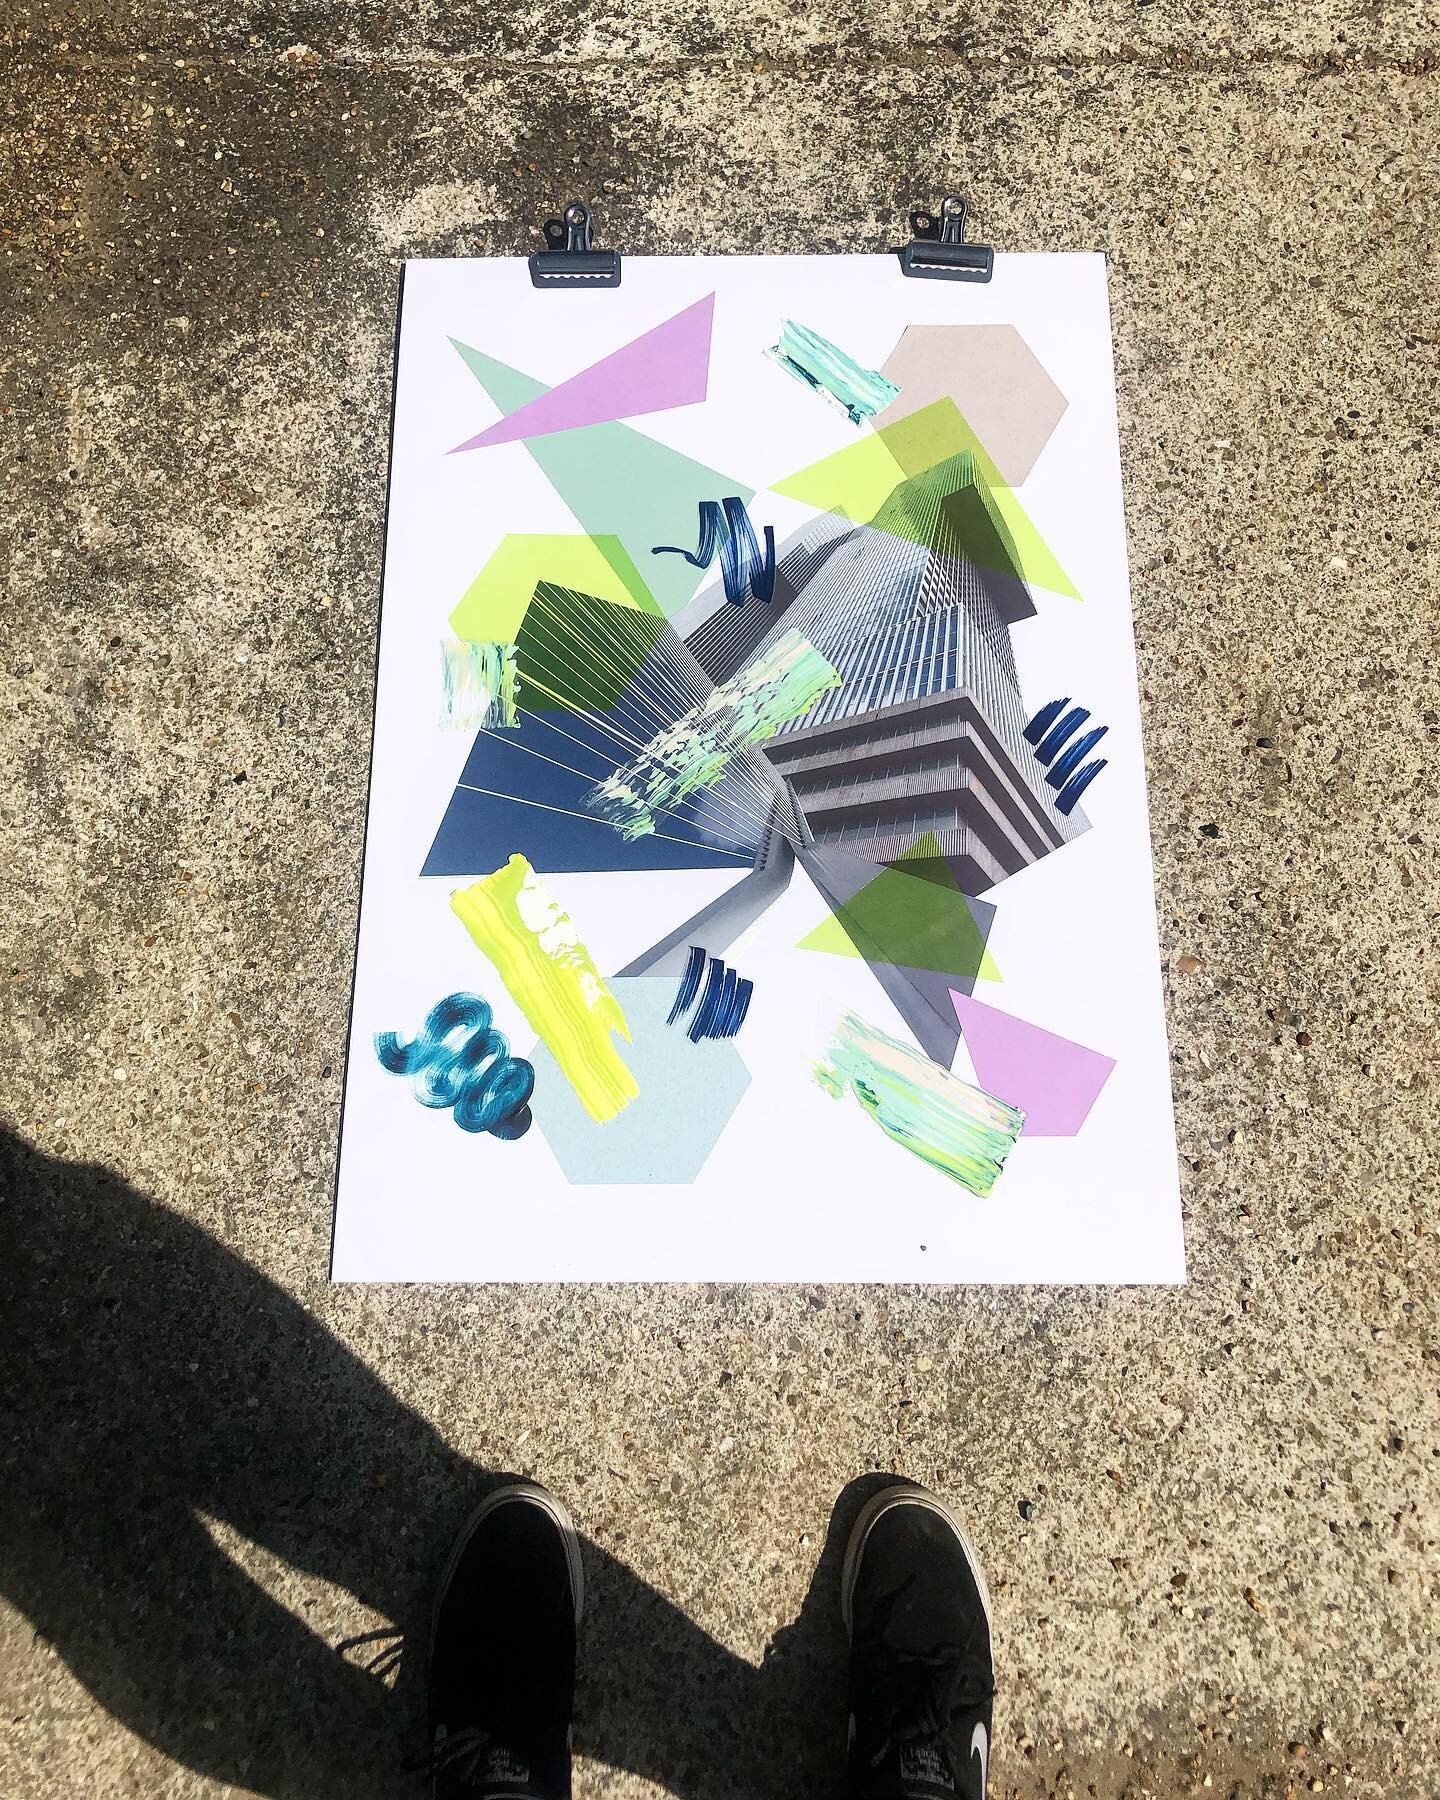 I feel.

Just finished a new collage for our studios summer exhibition &lsquo;I feel.&rsquo; &lsquo;For me, architecture evokes so much emotion, and I equate buildings I love to people, times and special memories. This collage combines photographs of